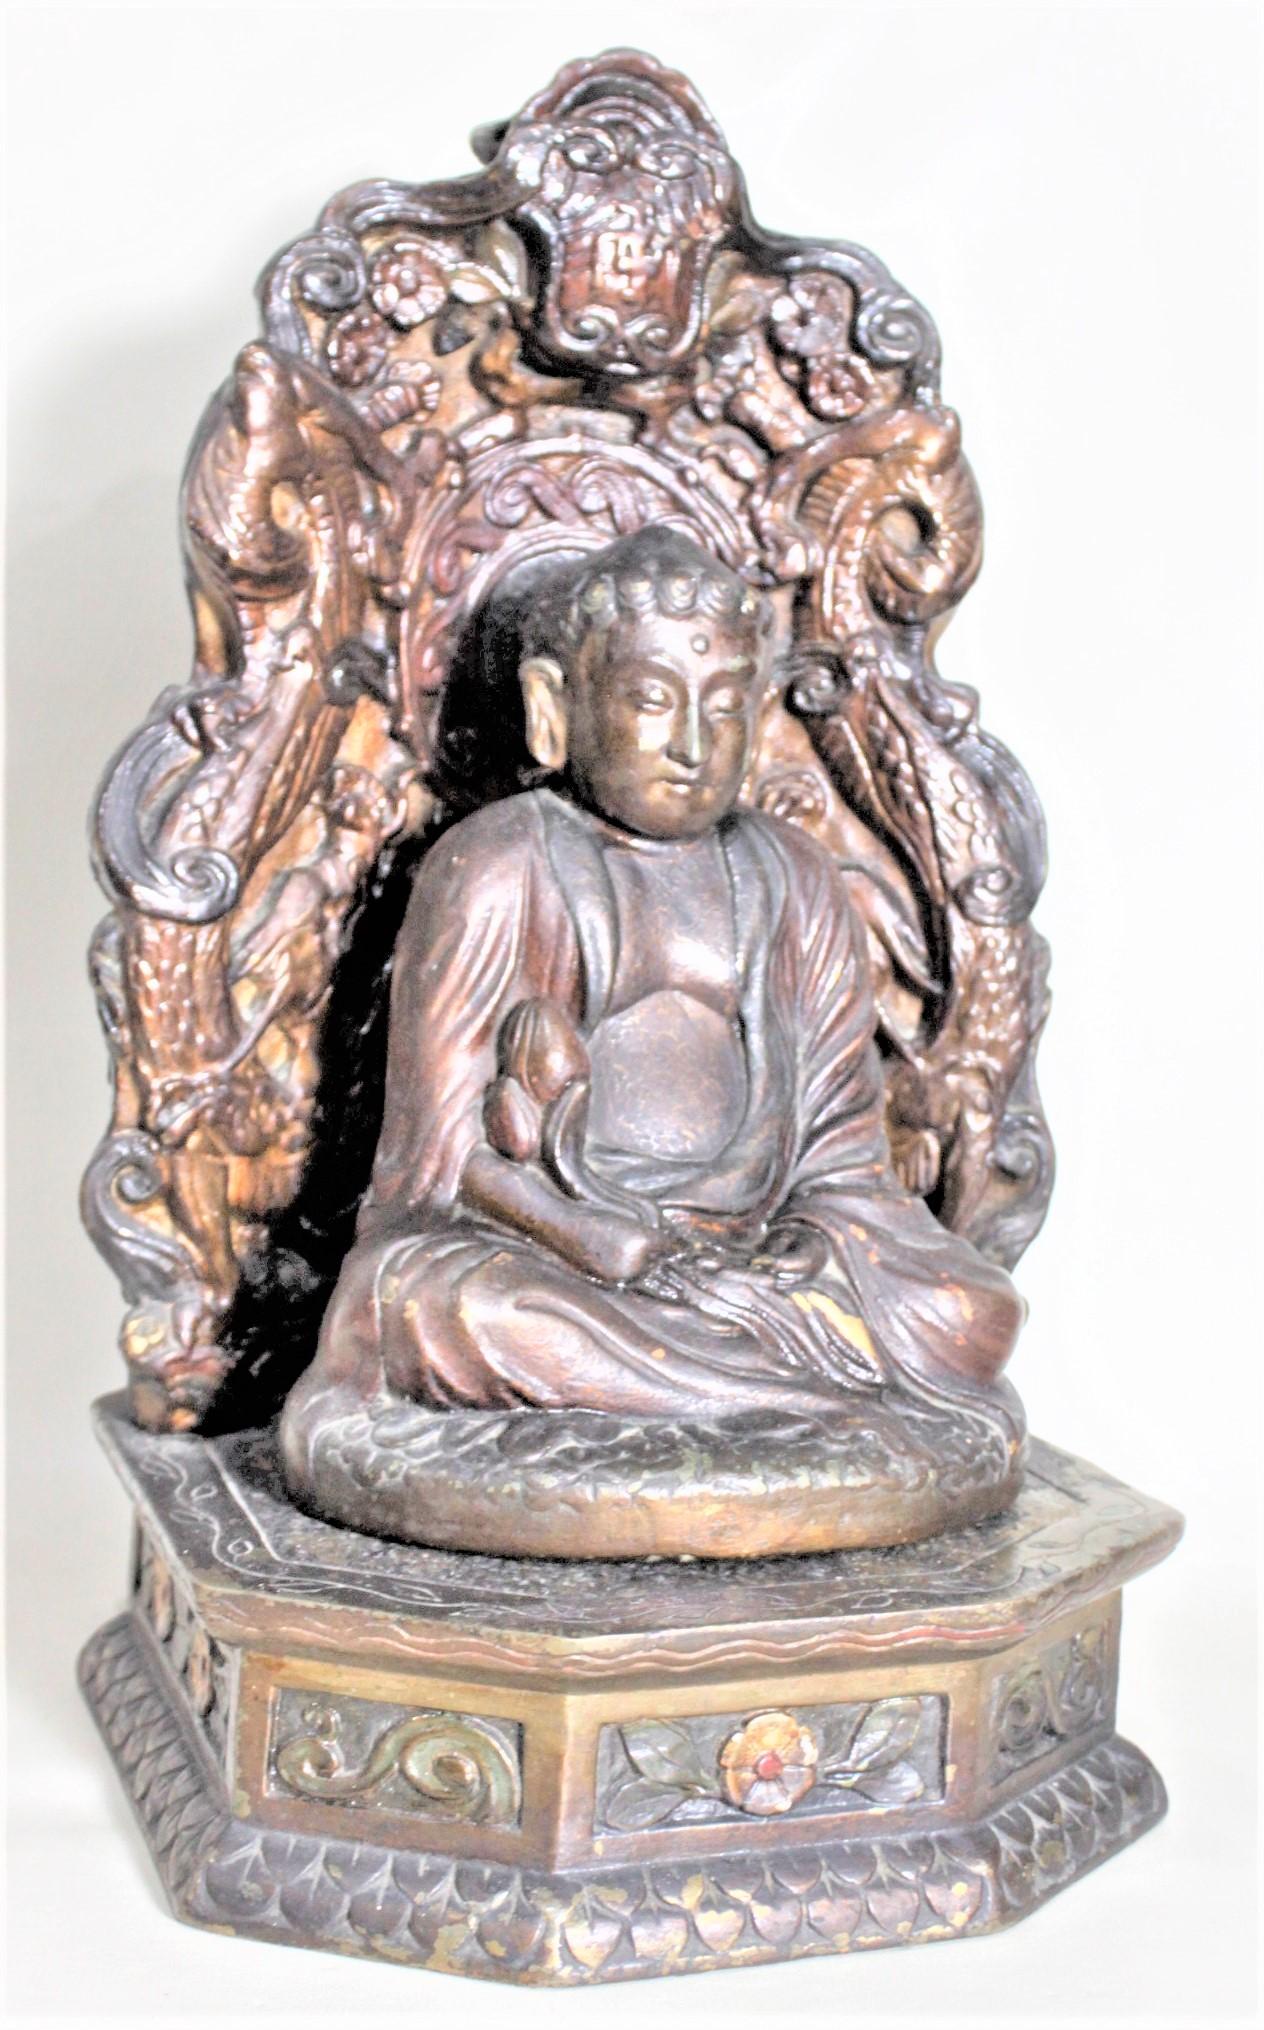 Chinese Antique Bronze Clad & Polychrome Painted Buddha Sculpture with Pedestal Stand For Sale